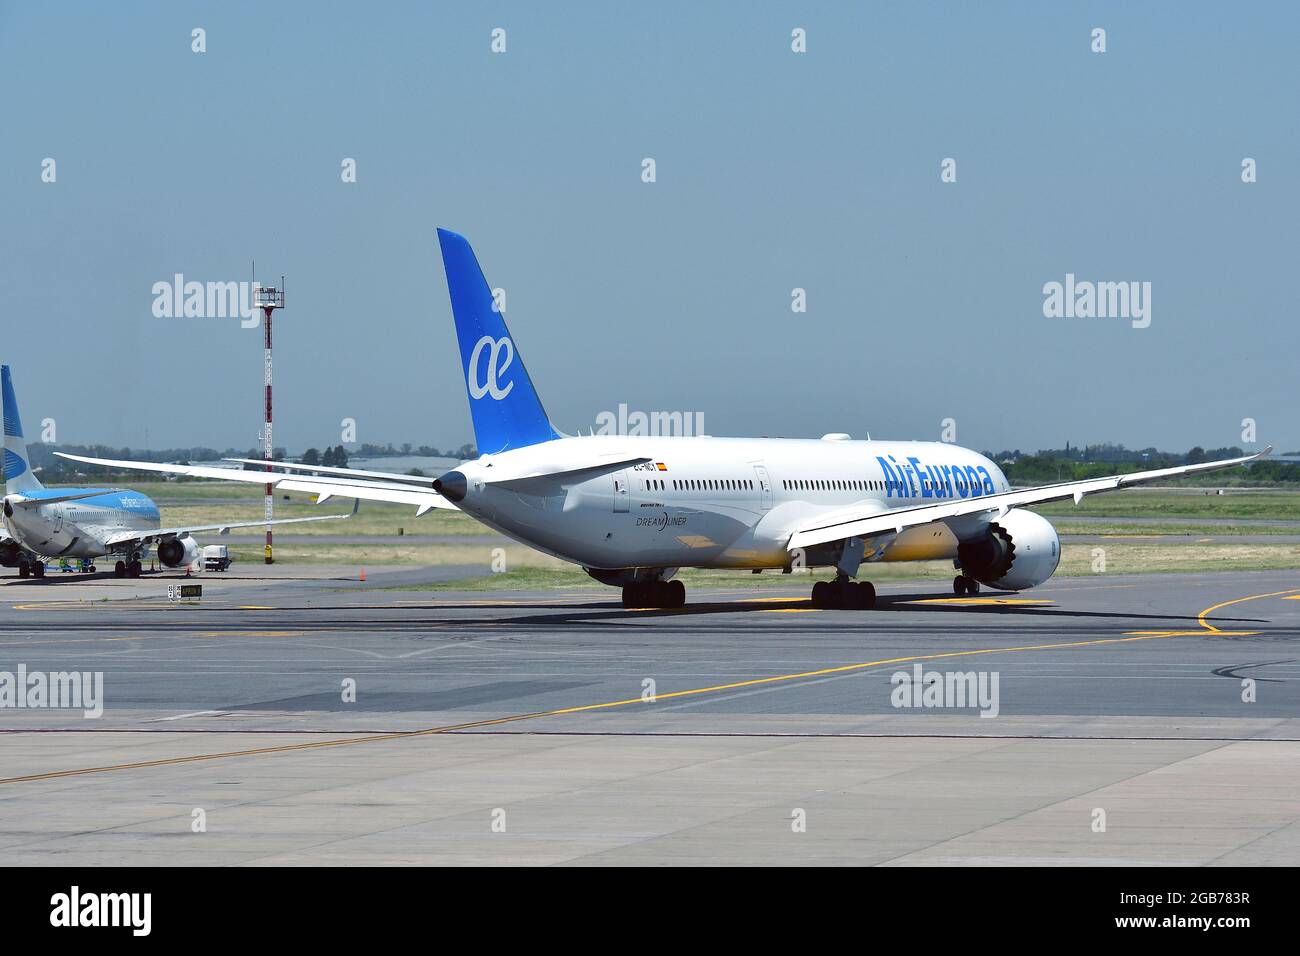 Air Europa Líneas Aéreas, S.A.U., branded as Air Europa (is the third-largest Spanish airline), Boeing 787-900 airplane Stock Photo